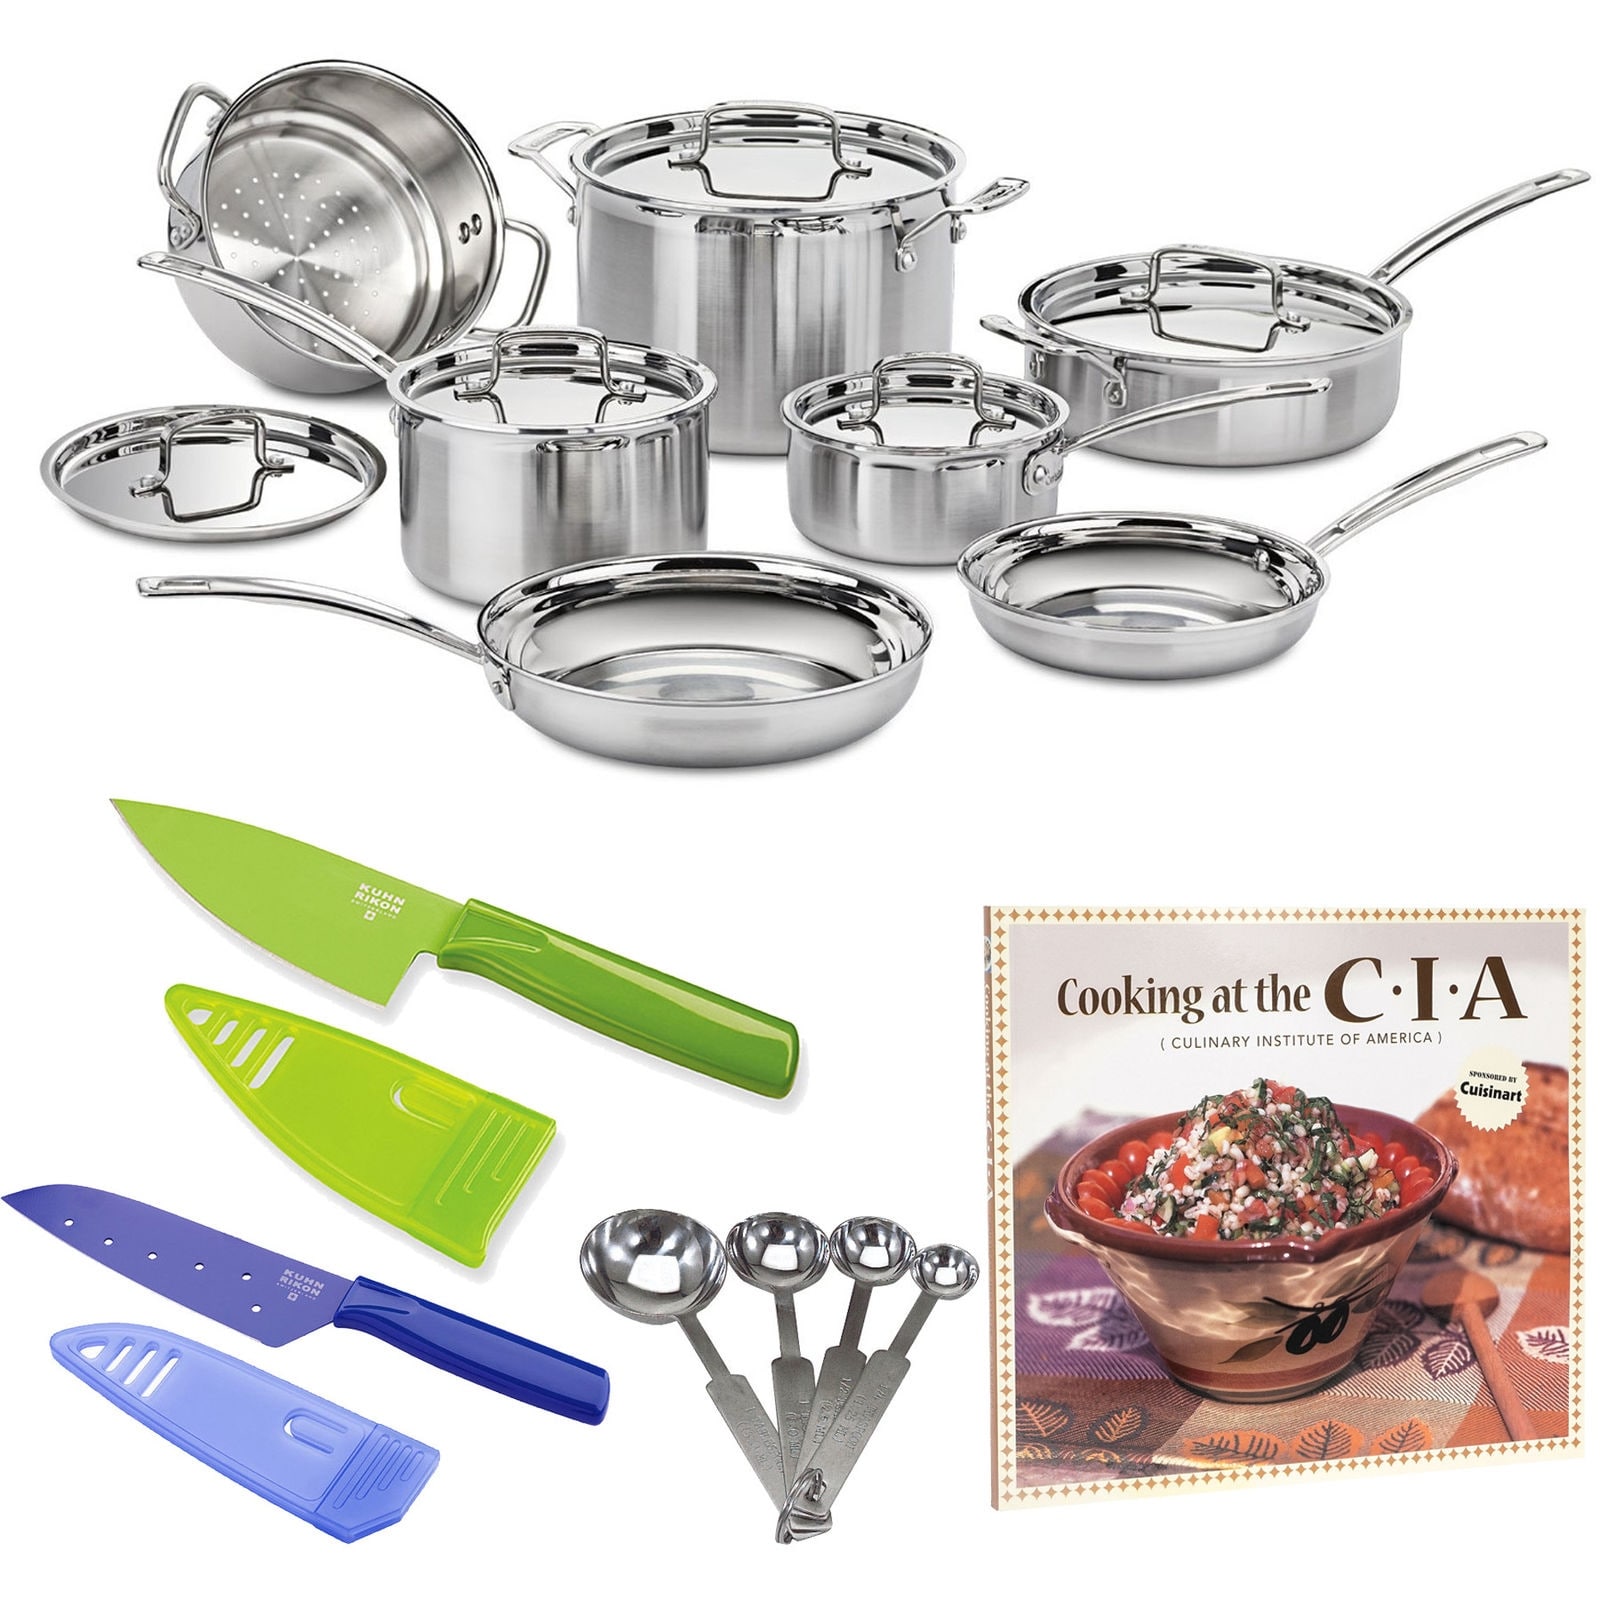 https://ak1.ostkcdn.com/images/products/is/images/direct/b86aae8d62f5b3fa36dbf7305de31402a7da1c4d/Cuisinart-MCP-12N-MultiClad-Pro-Stainless-Steel-16-Piece-Cookware-Set-Bundle.jpg